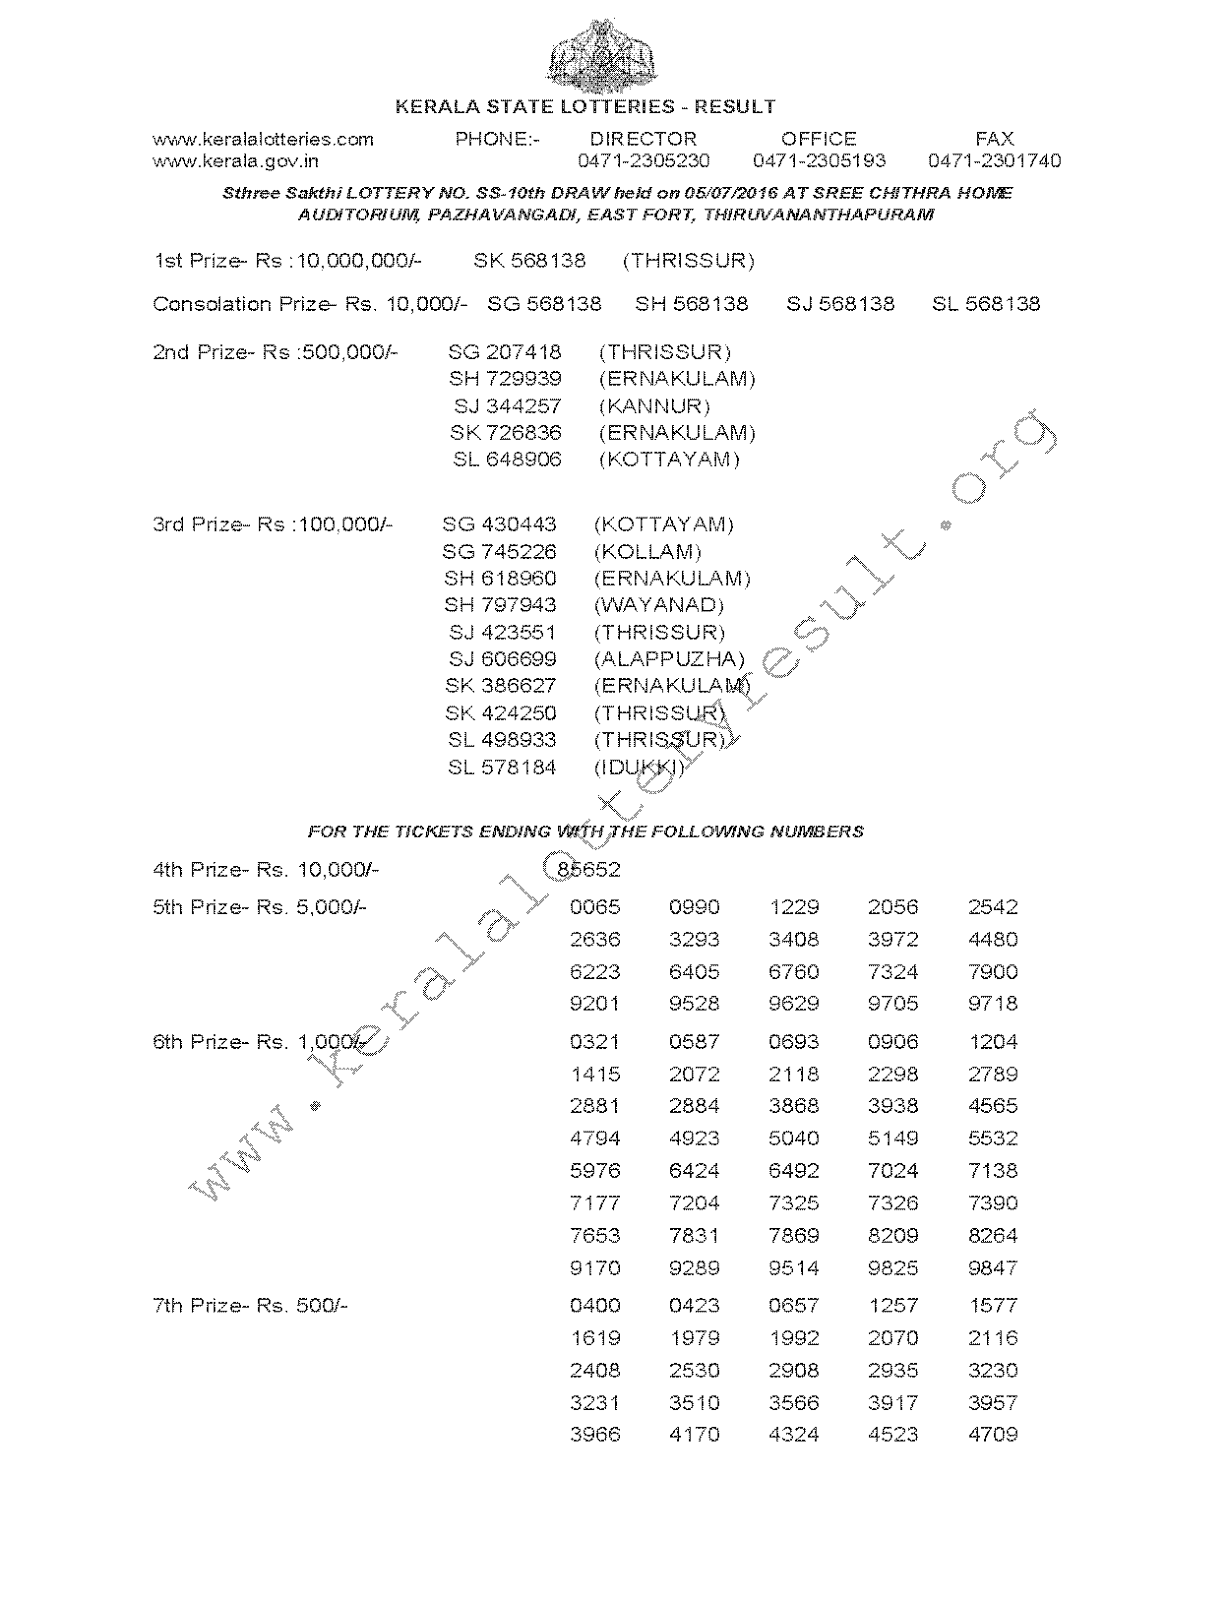 STHREE SAKTHI SS 10 Lottery Results 5-7-2016